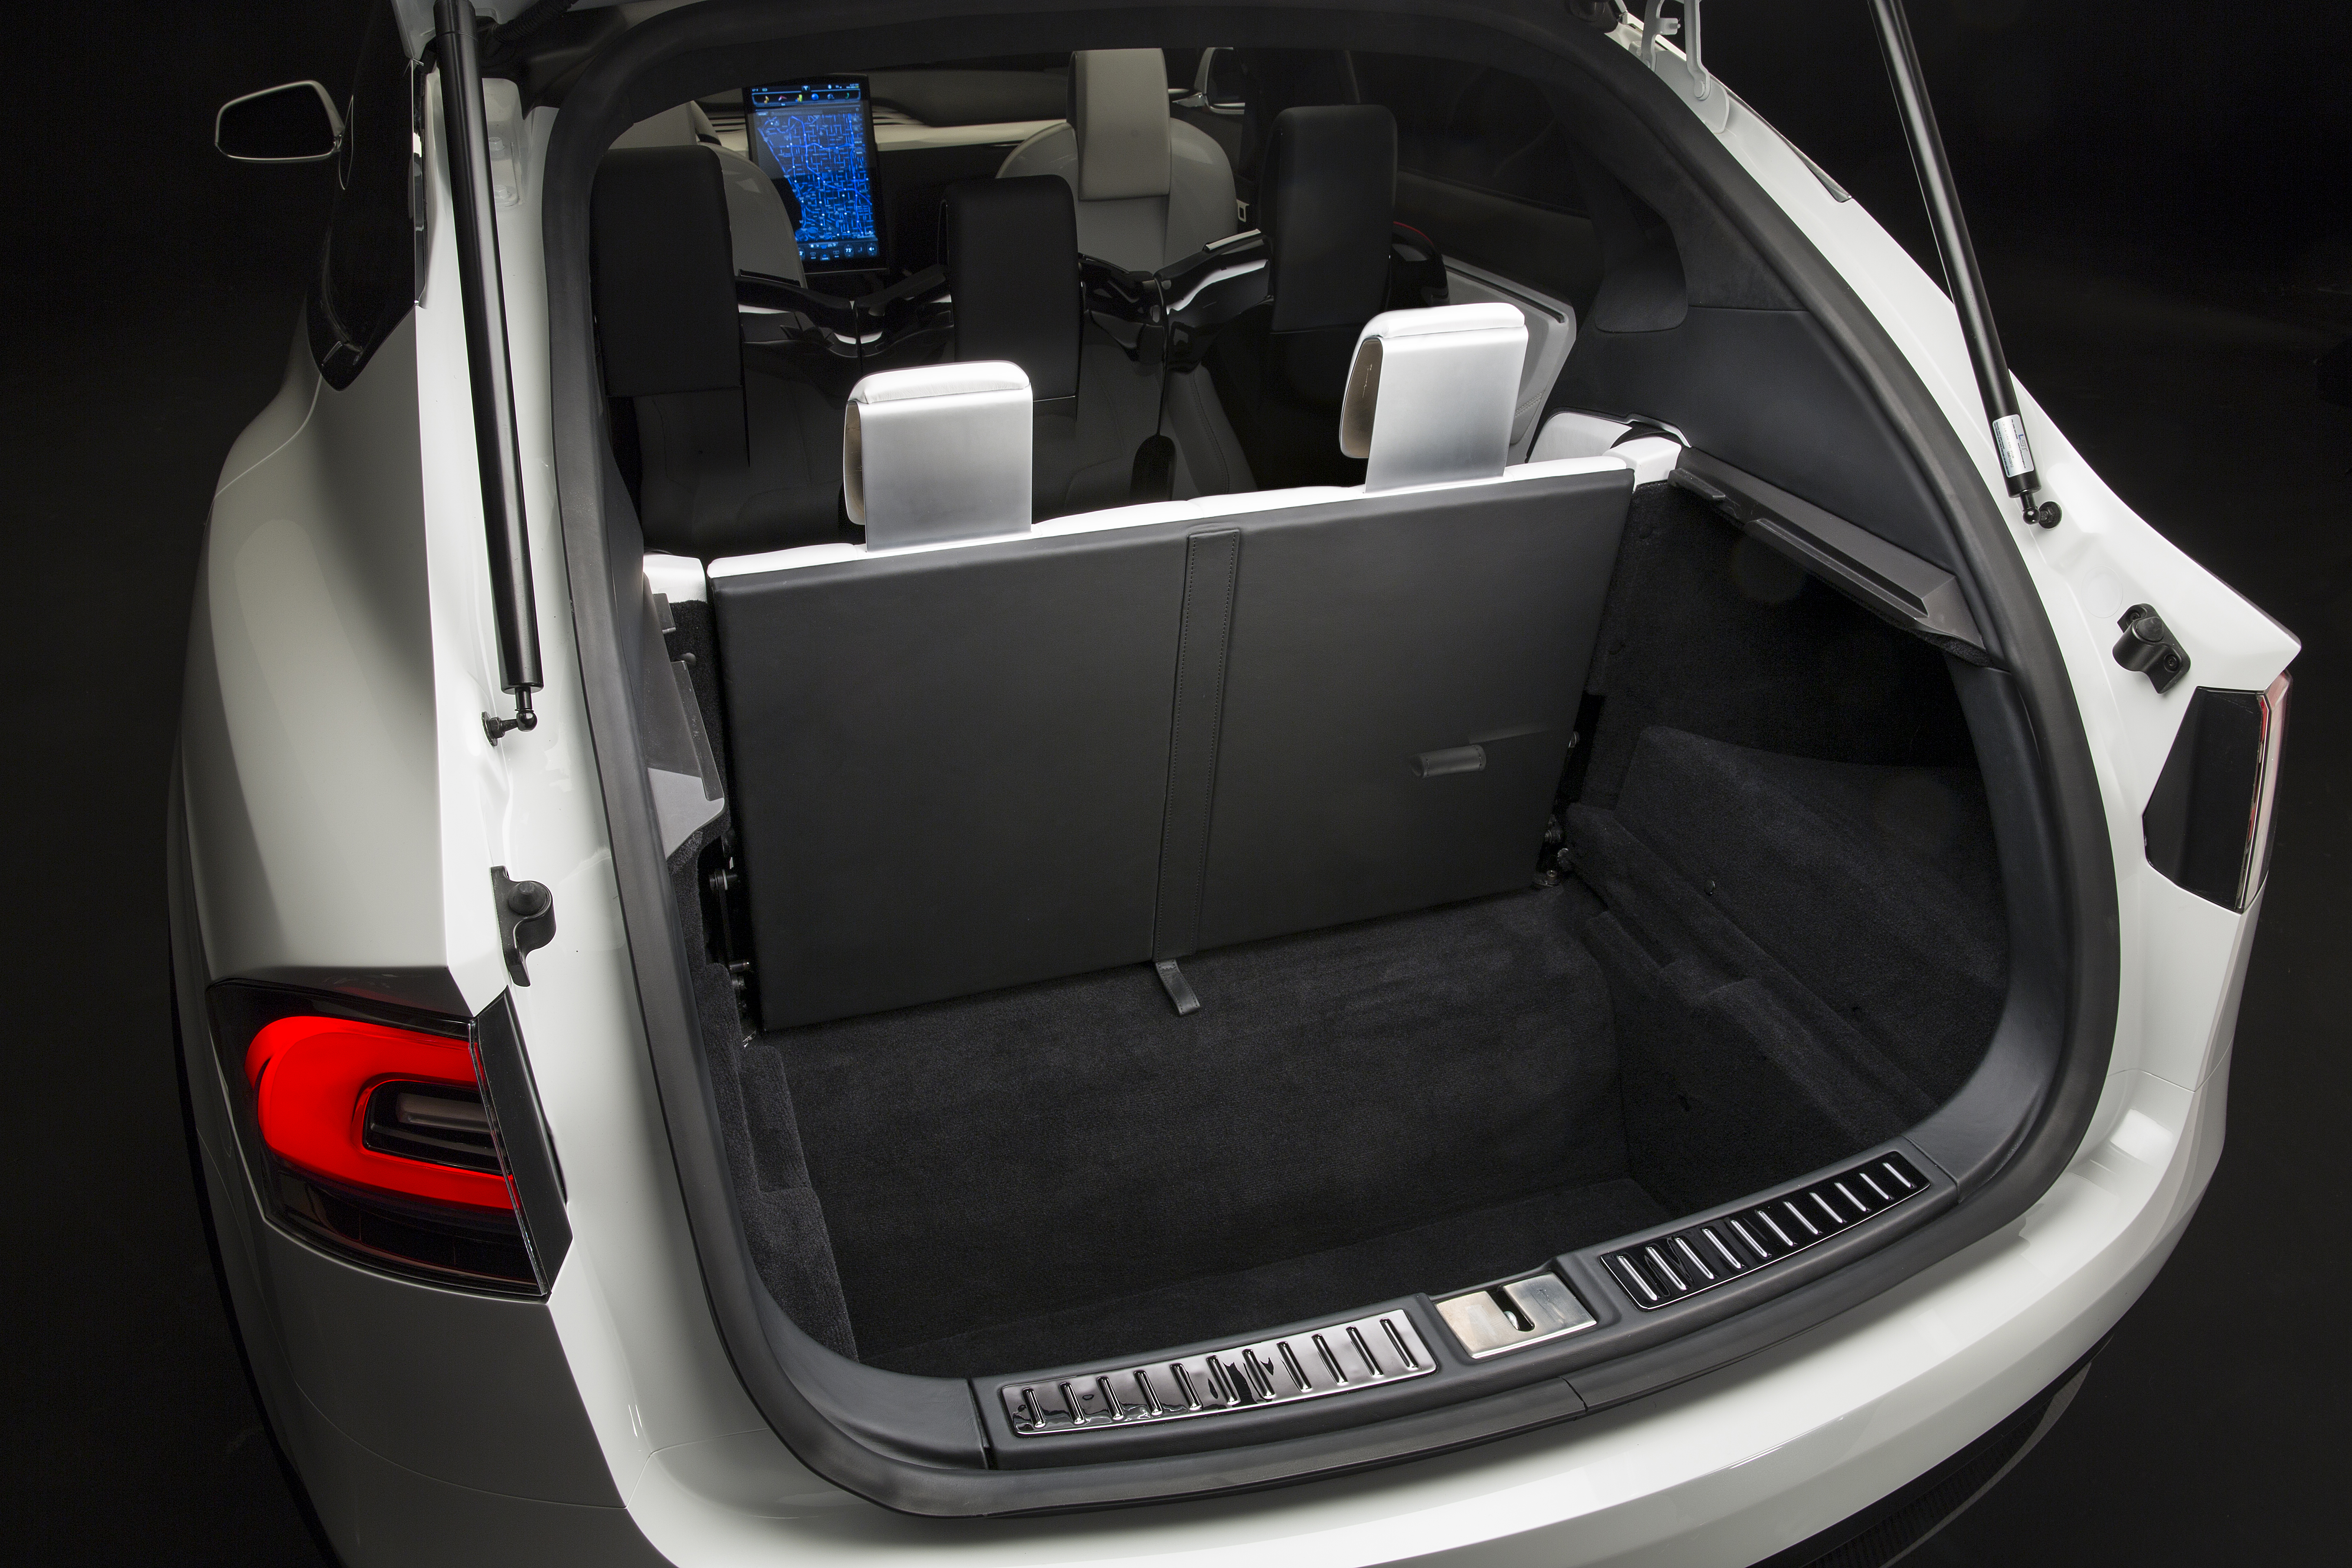 Expansive trunk space allows for a bicycle to fit in the back and two golf bags in the front trunk where the engine on a gasoline car would be.